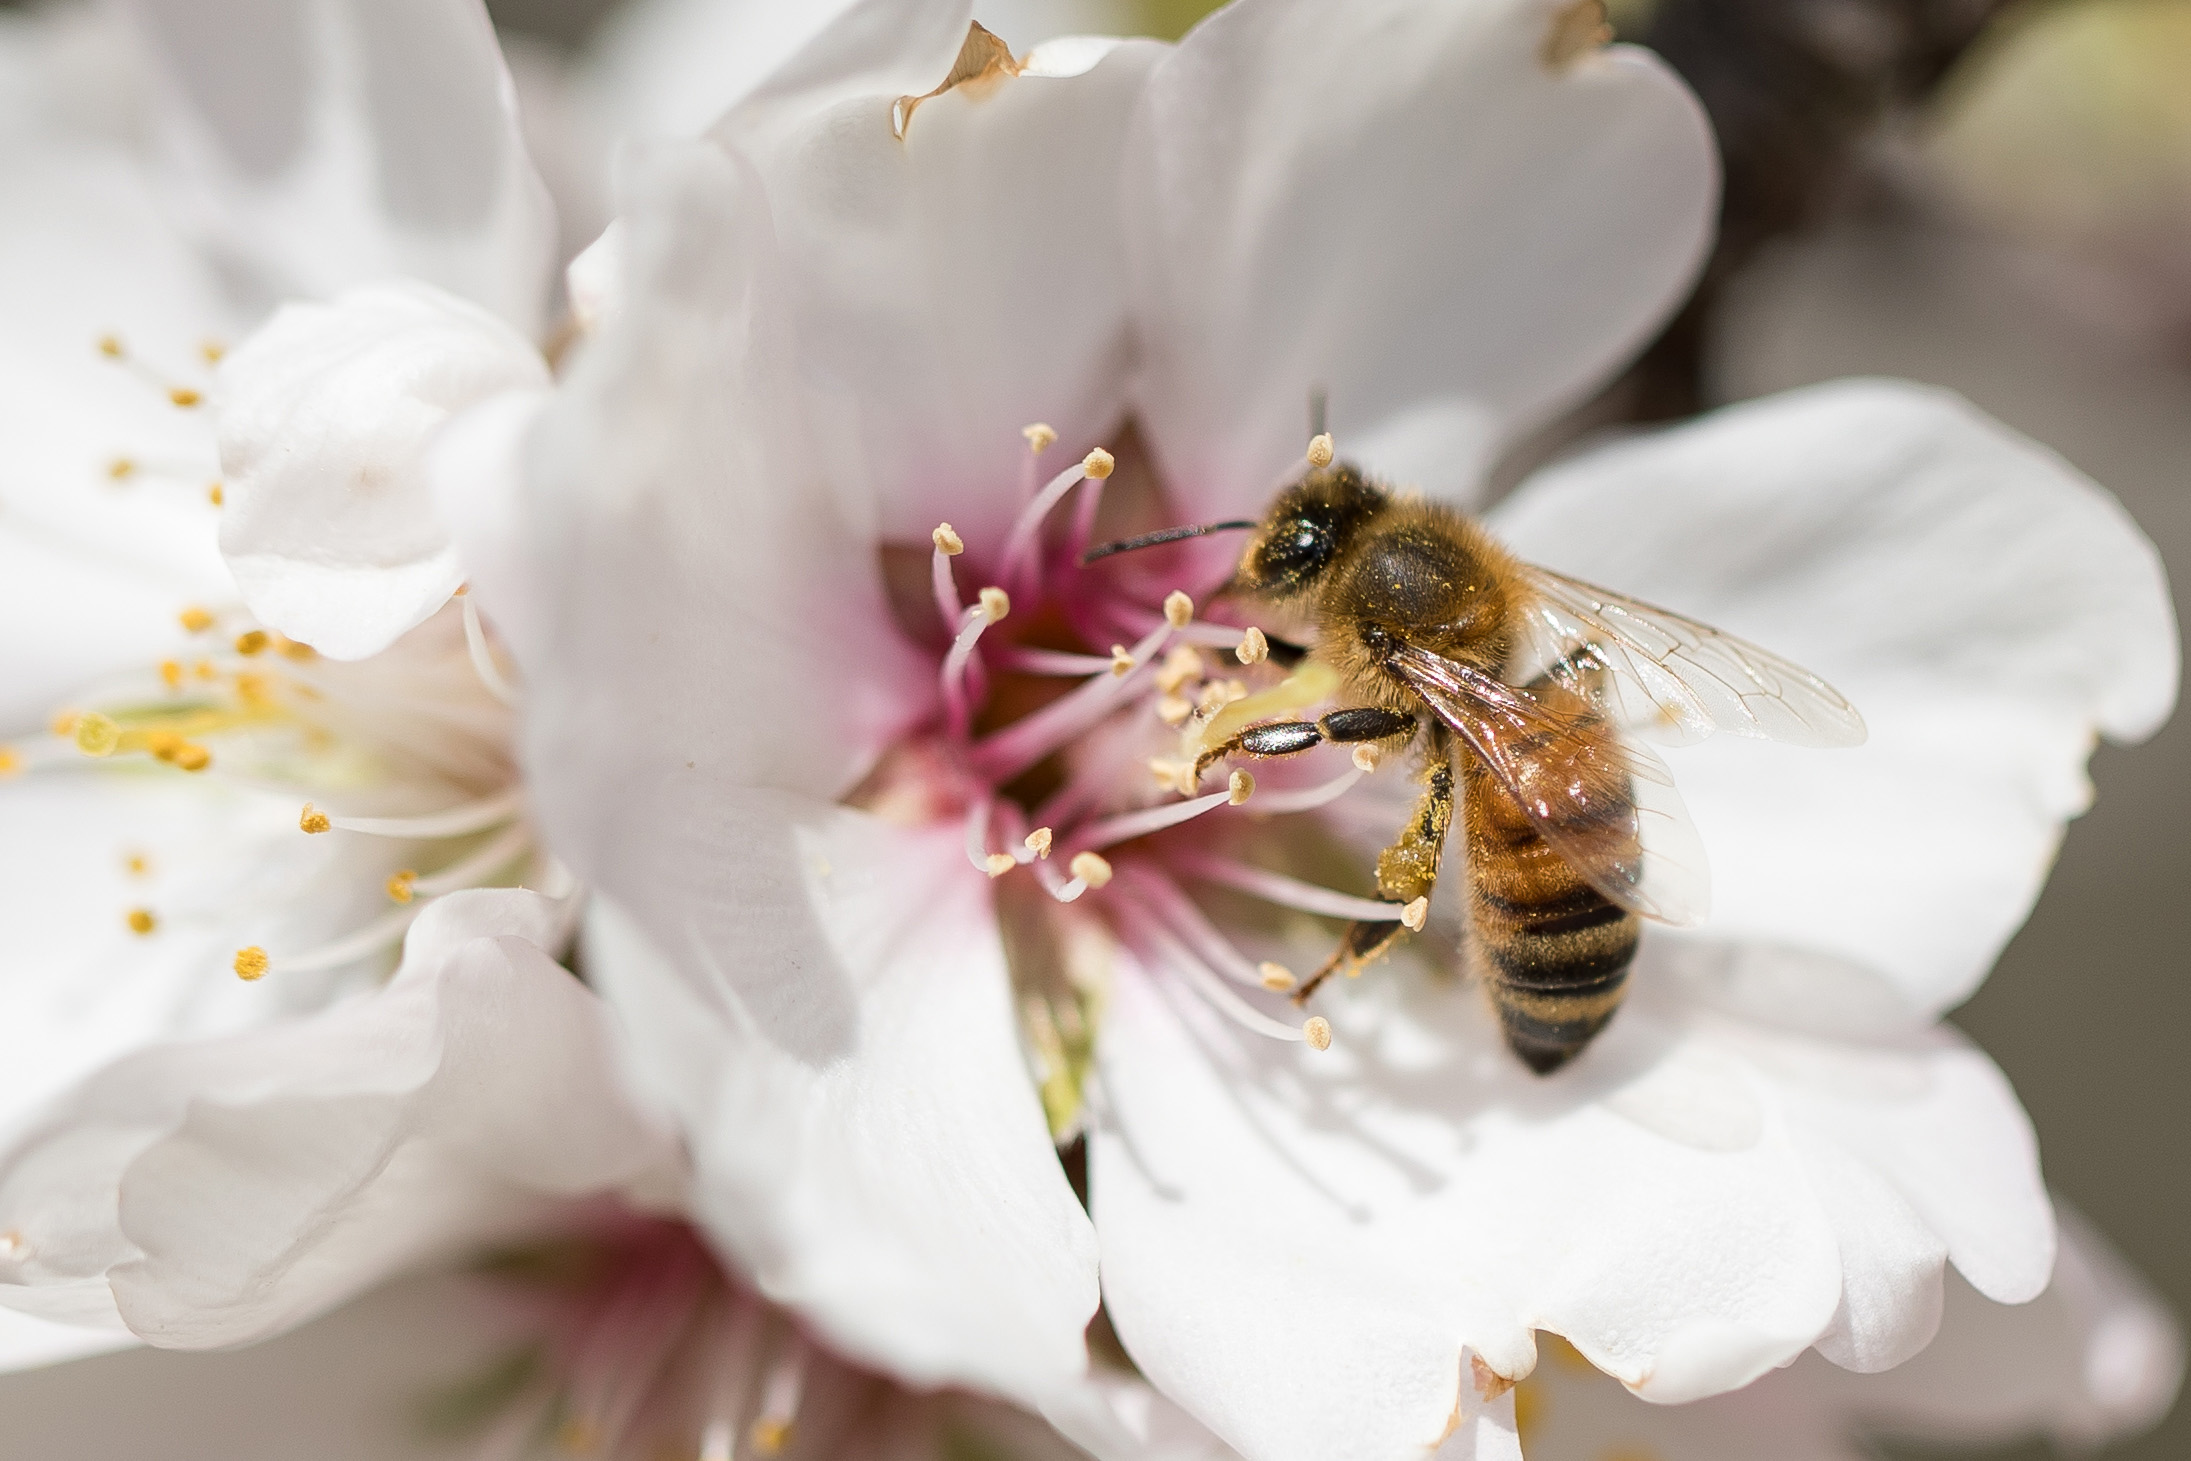 Pollinators support 1/3 of the world’s crops, including many ingredients used in Häagen-Dazs super-premium ice cream.